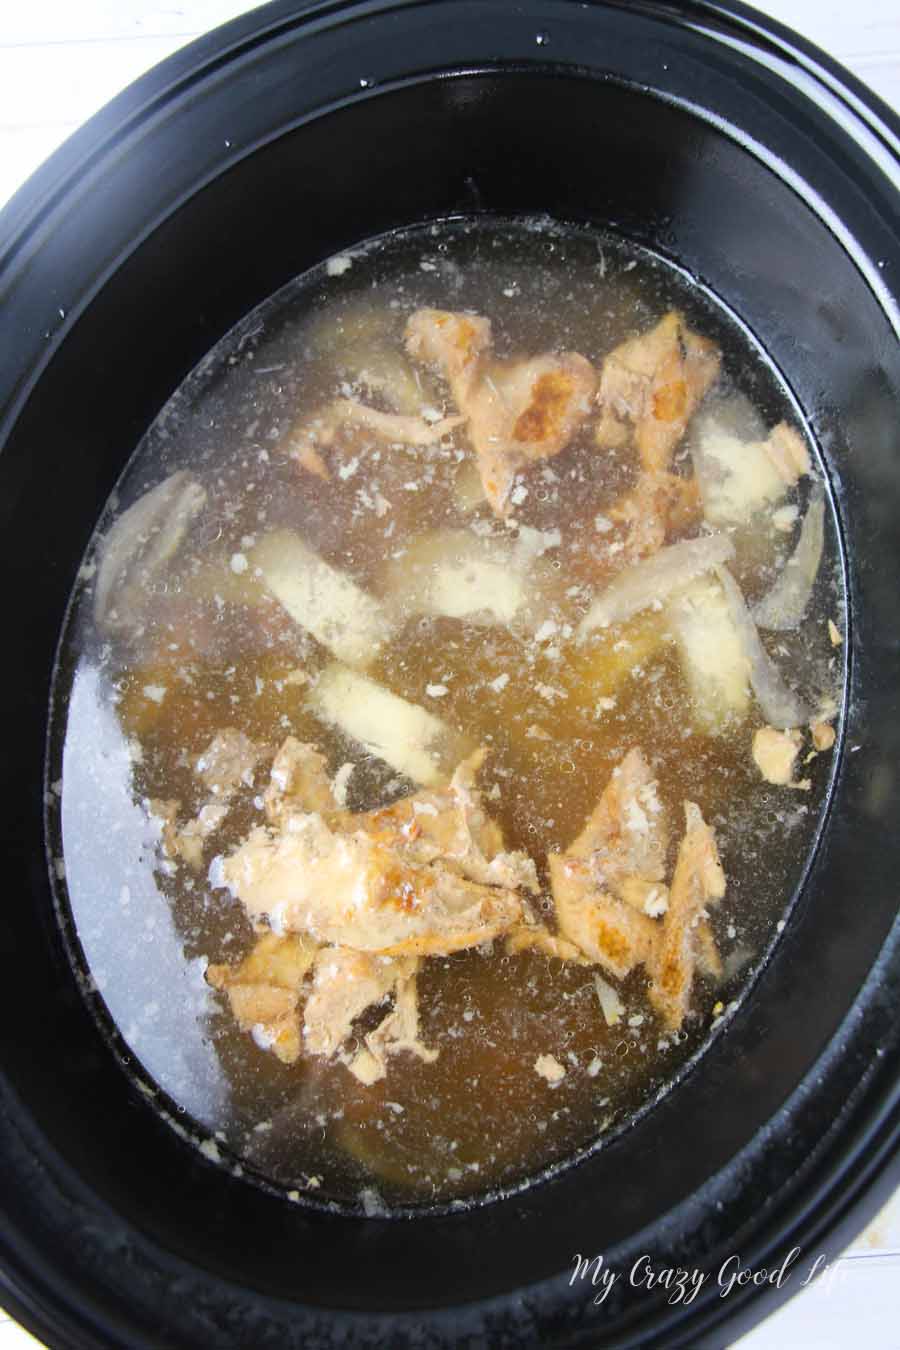 I'm sure you've seen the hype surrounding bone broth and the many health benefits it offers. It's also a really tasty base for a lot of my favorite recipes. This chicken bone broth recipe is super easy. I'm going to show you how to make bone broth in the Crockpot, it's a total game changer! #bonebroth #chickenbonebroth #recipes #crockpotrecipes